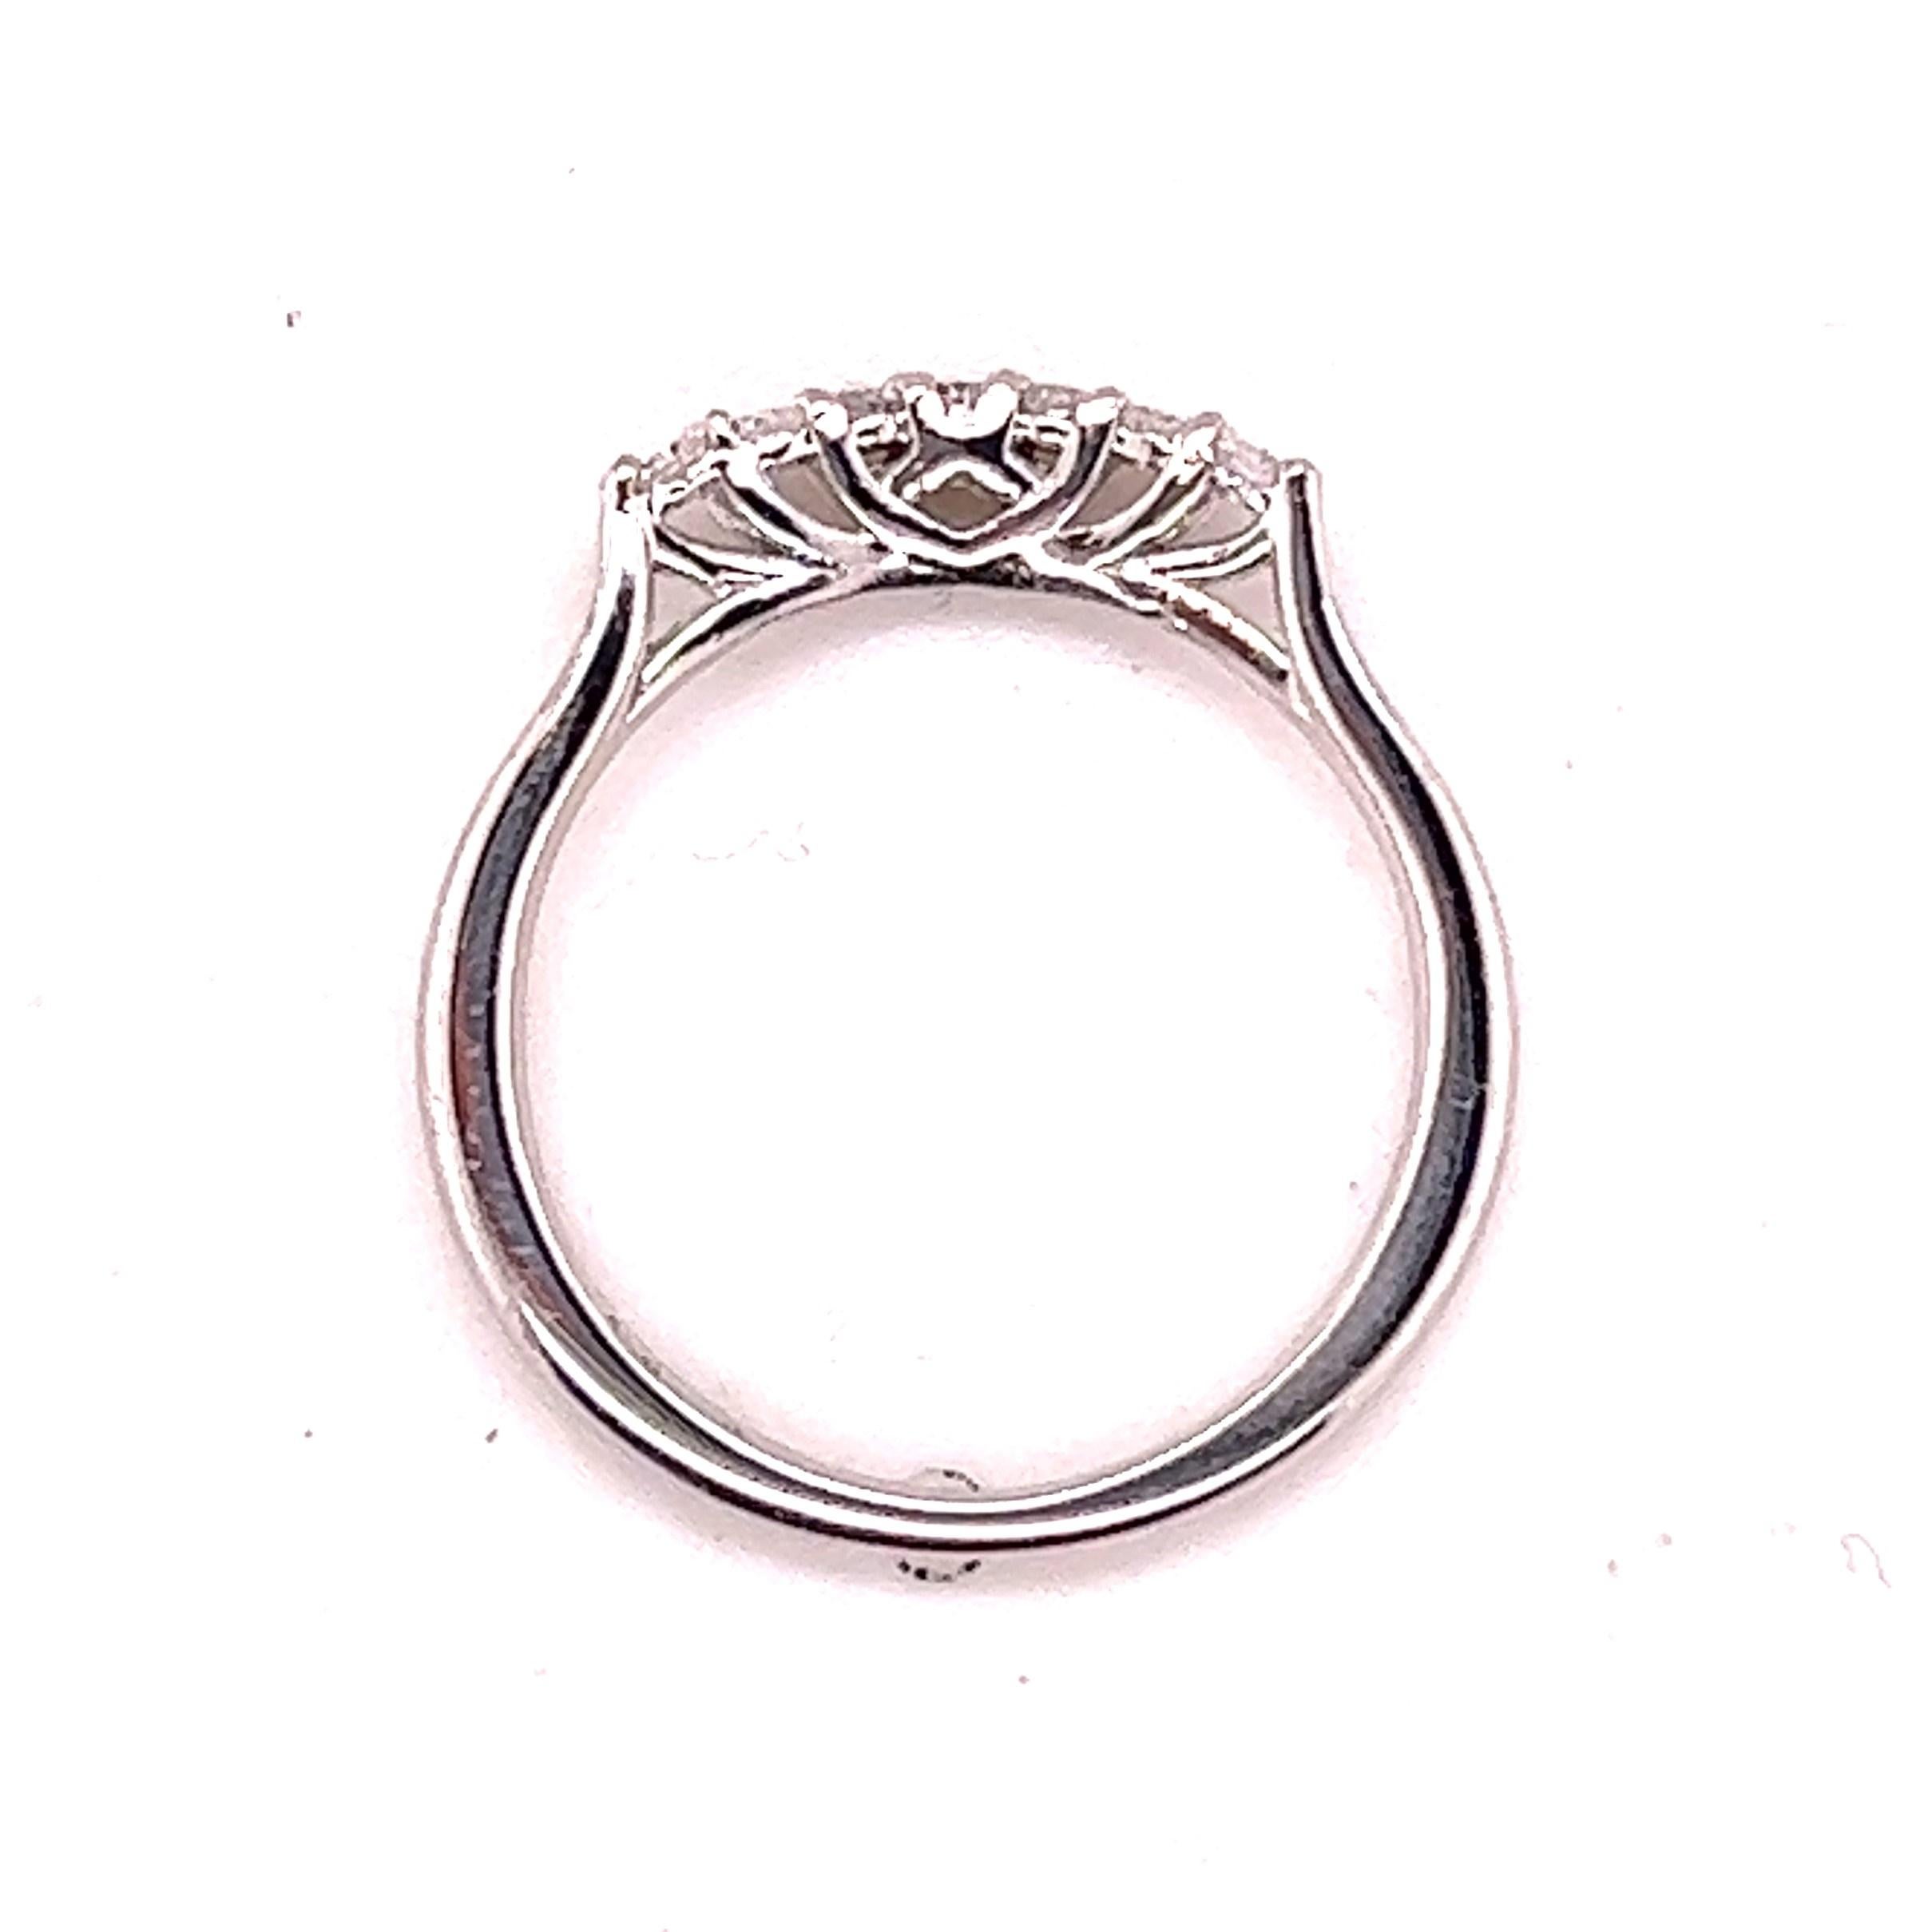 18kt white gold Hearts on Fire curved band. The band contains 7 round brilliant diamonds weighing approximately .14 carats. The diamonds possess an average of H-I color and SI1-SI2 clarity as stated by Hearts on Fire. 

The band measures 1.21mm x